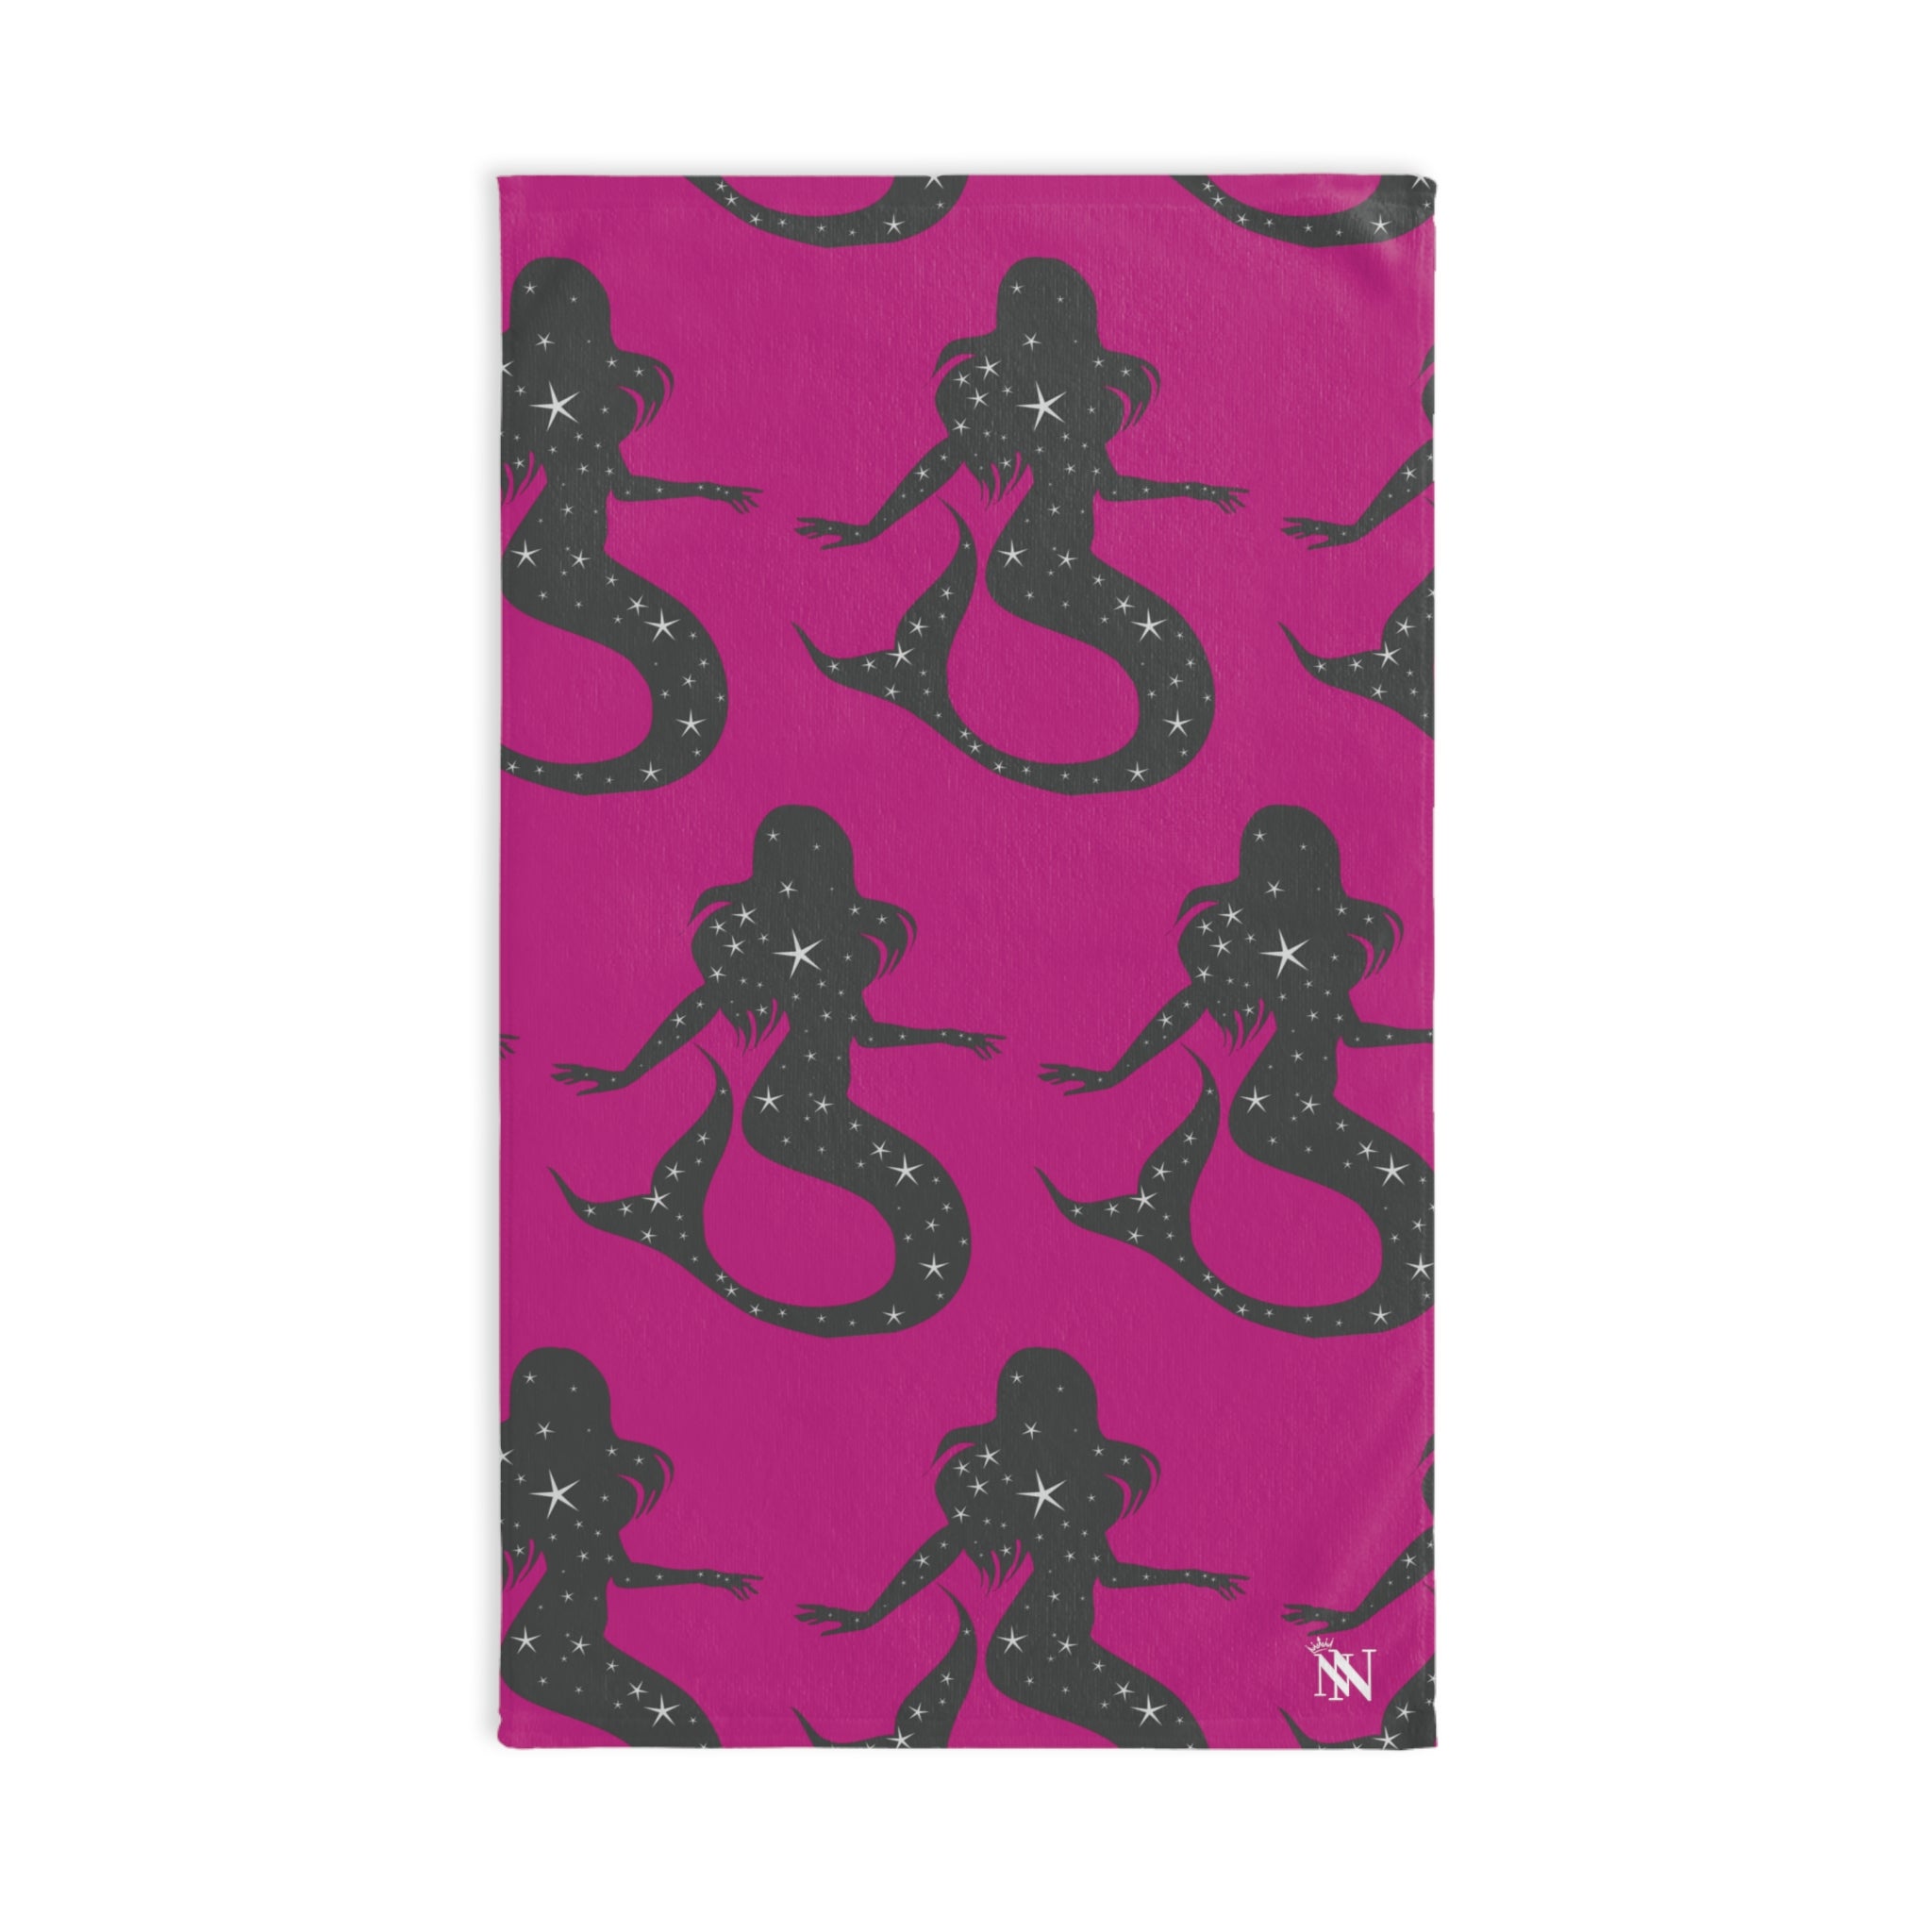 Mermaid StarFuscia | Funny Gifts for Men - Gifts for Him - Birthday Gifts for Men, Him, Husband, Boyfriend, New Couple Gifts, Fathers & Valentines Day Gifts, Hand Towels NECTAR NAPKINS